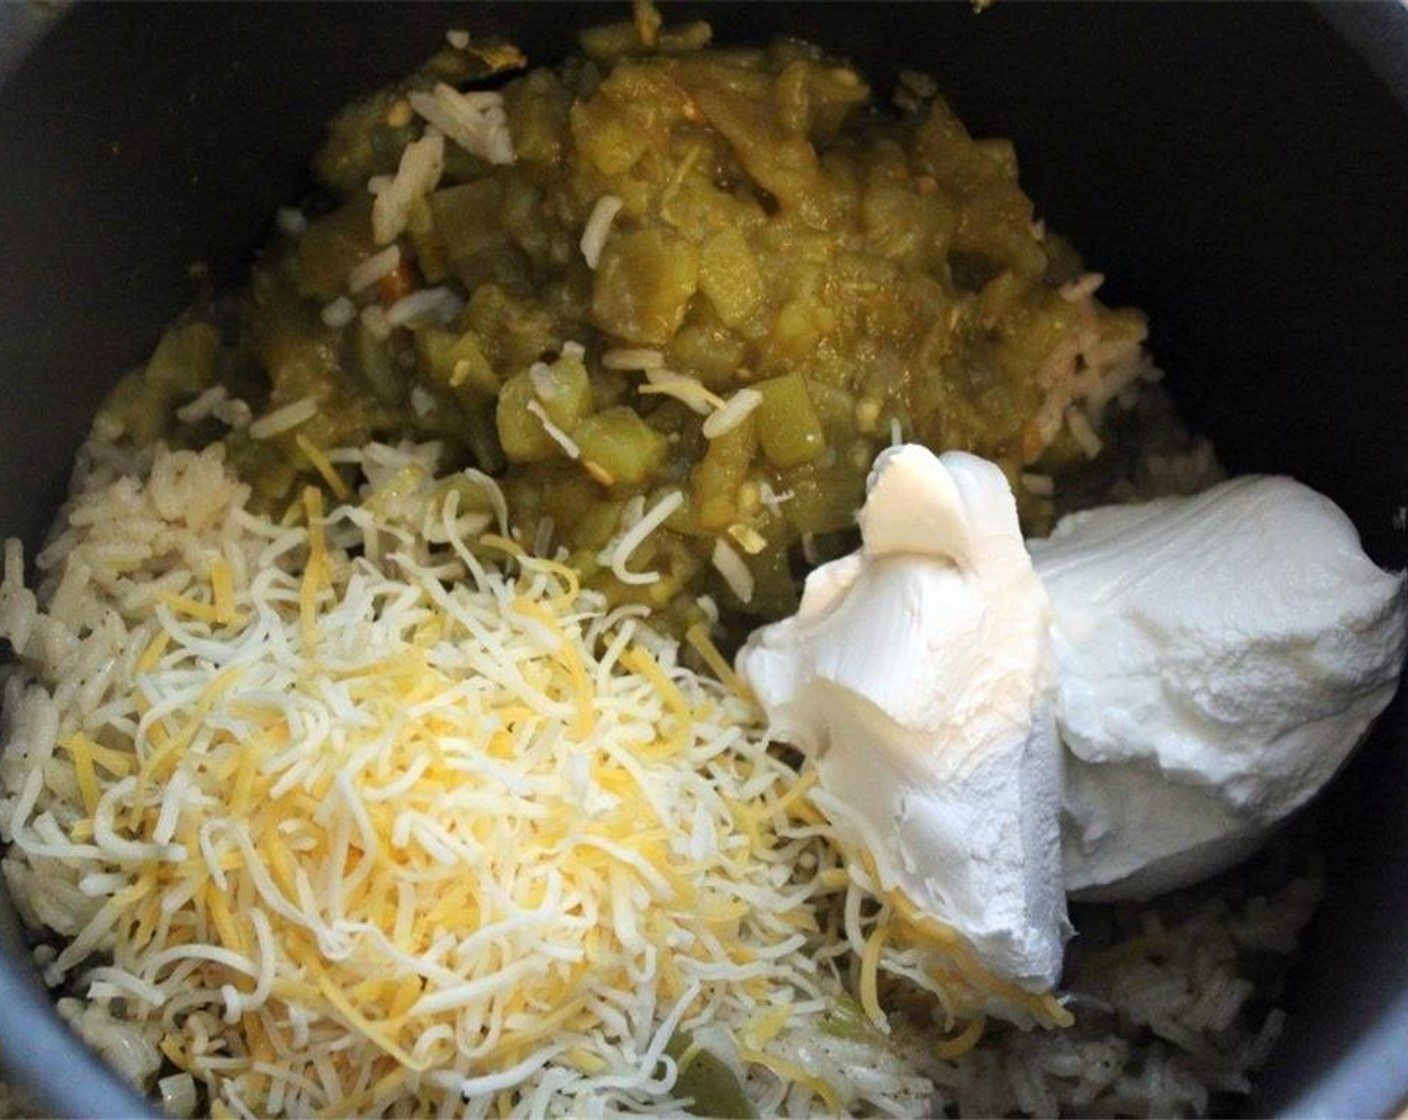 step 9 Now add the Diced Green Chiles (1 can), half the Shredded Cheese (1/2 cup), Sour Cream (1/4 cup), and Cream Cheese (2 Tbsp) to the pot.